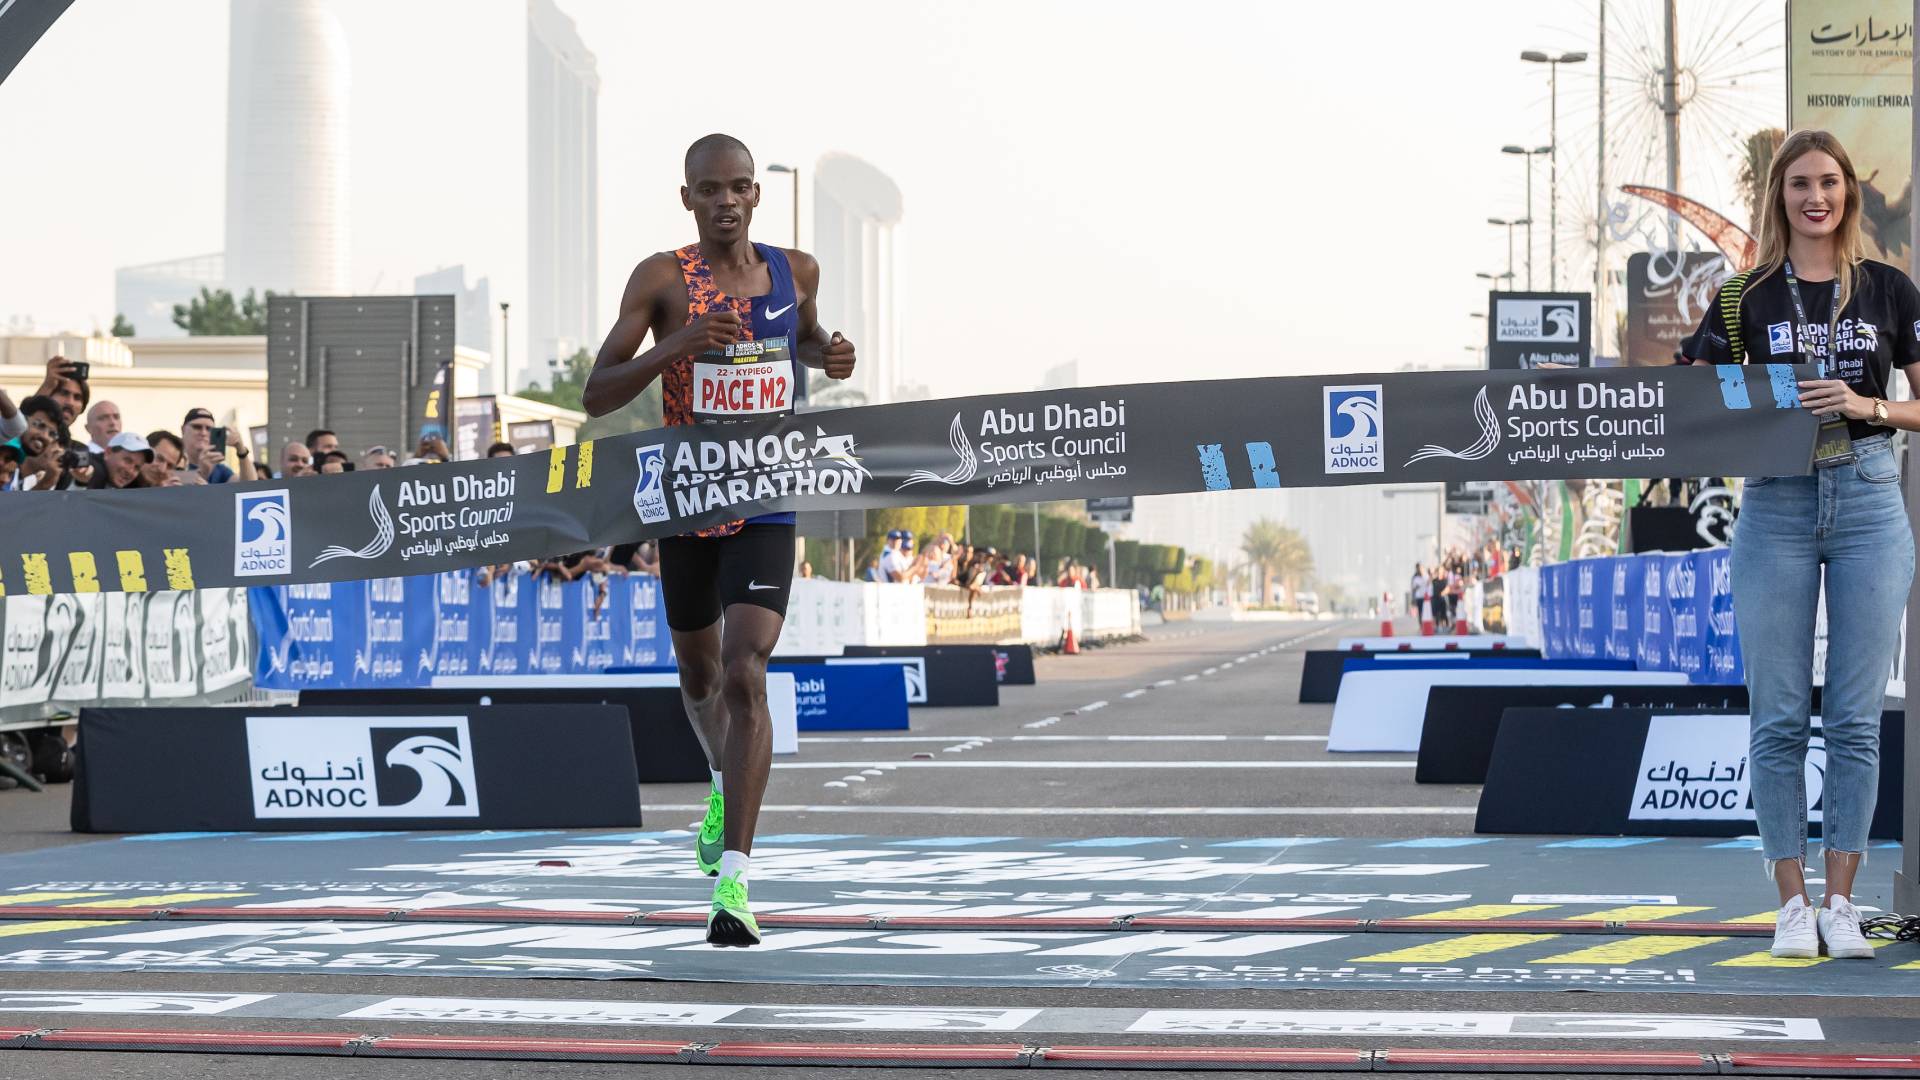 Nike Announced As The Official Technical Sponsor For The Upcoming 2021 ADNOC Abu Dhabi Marathon